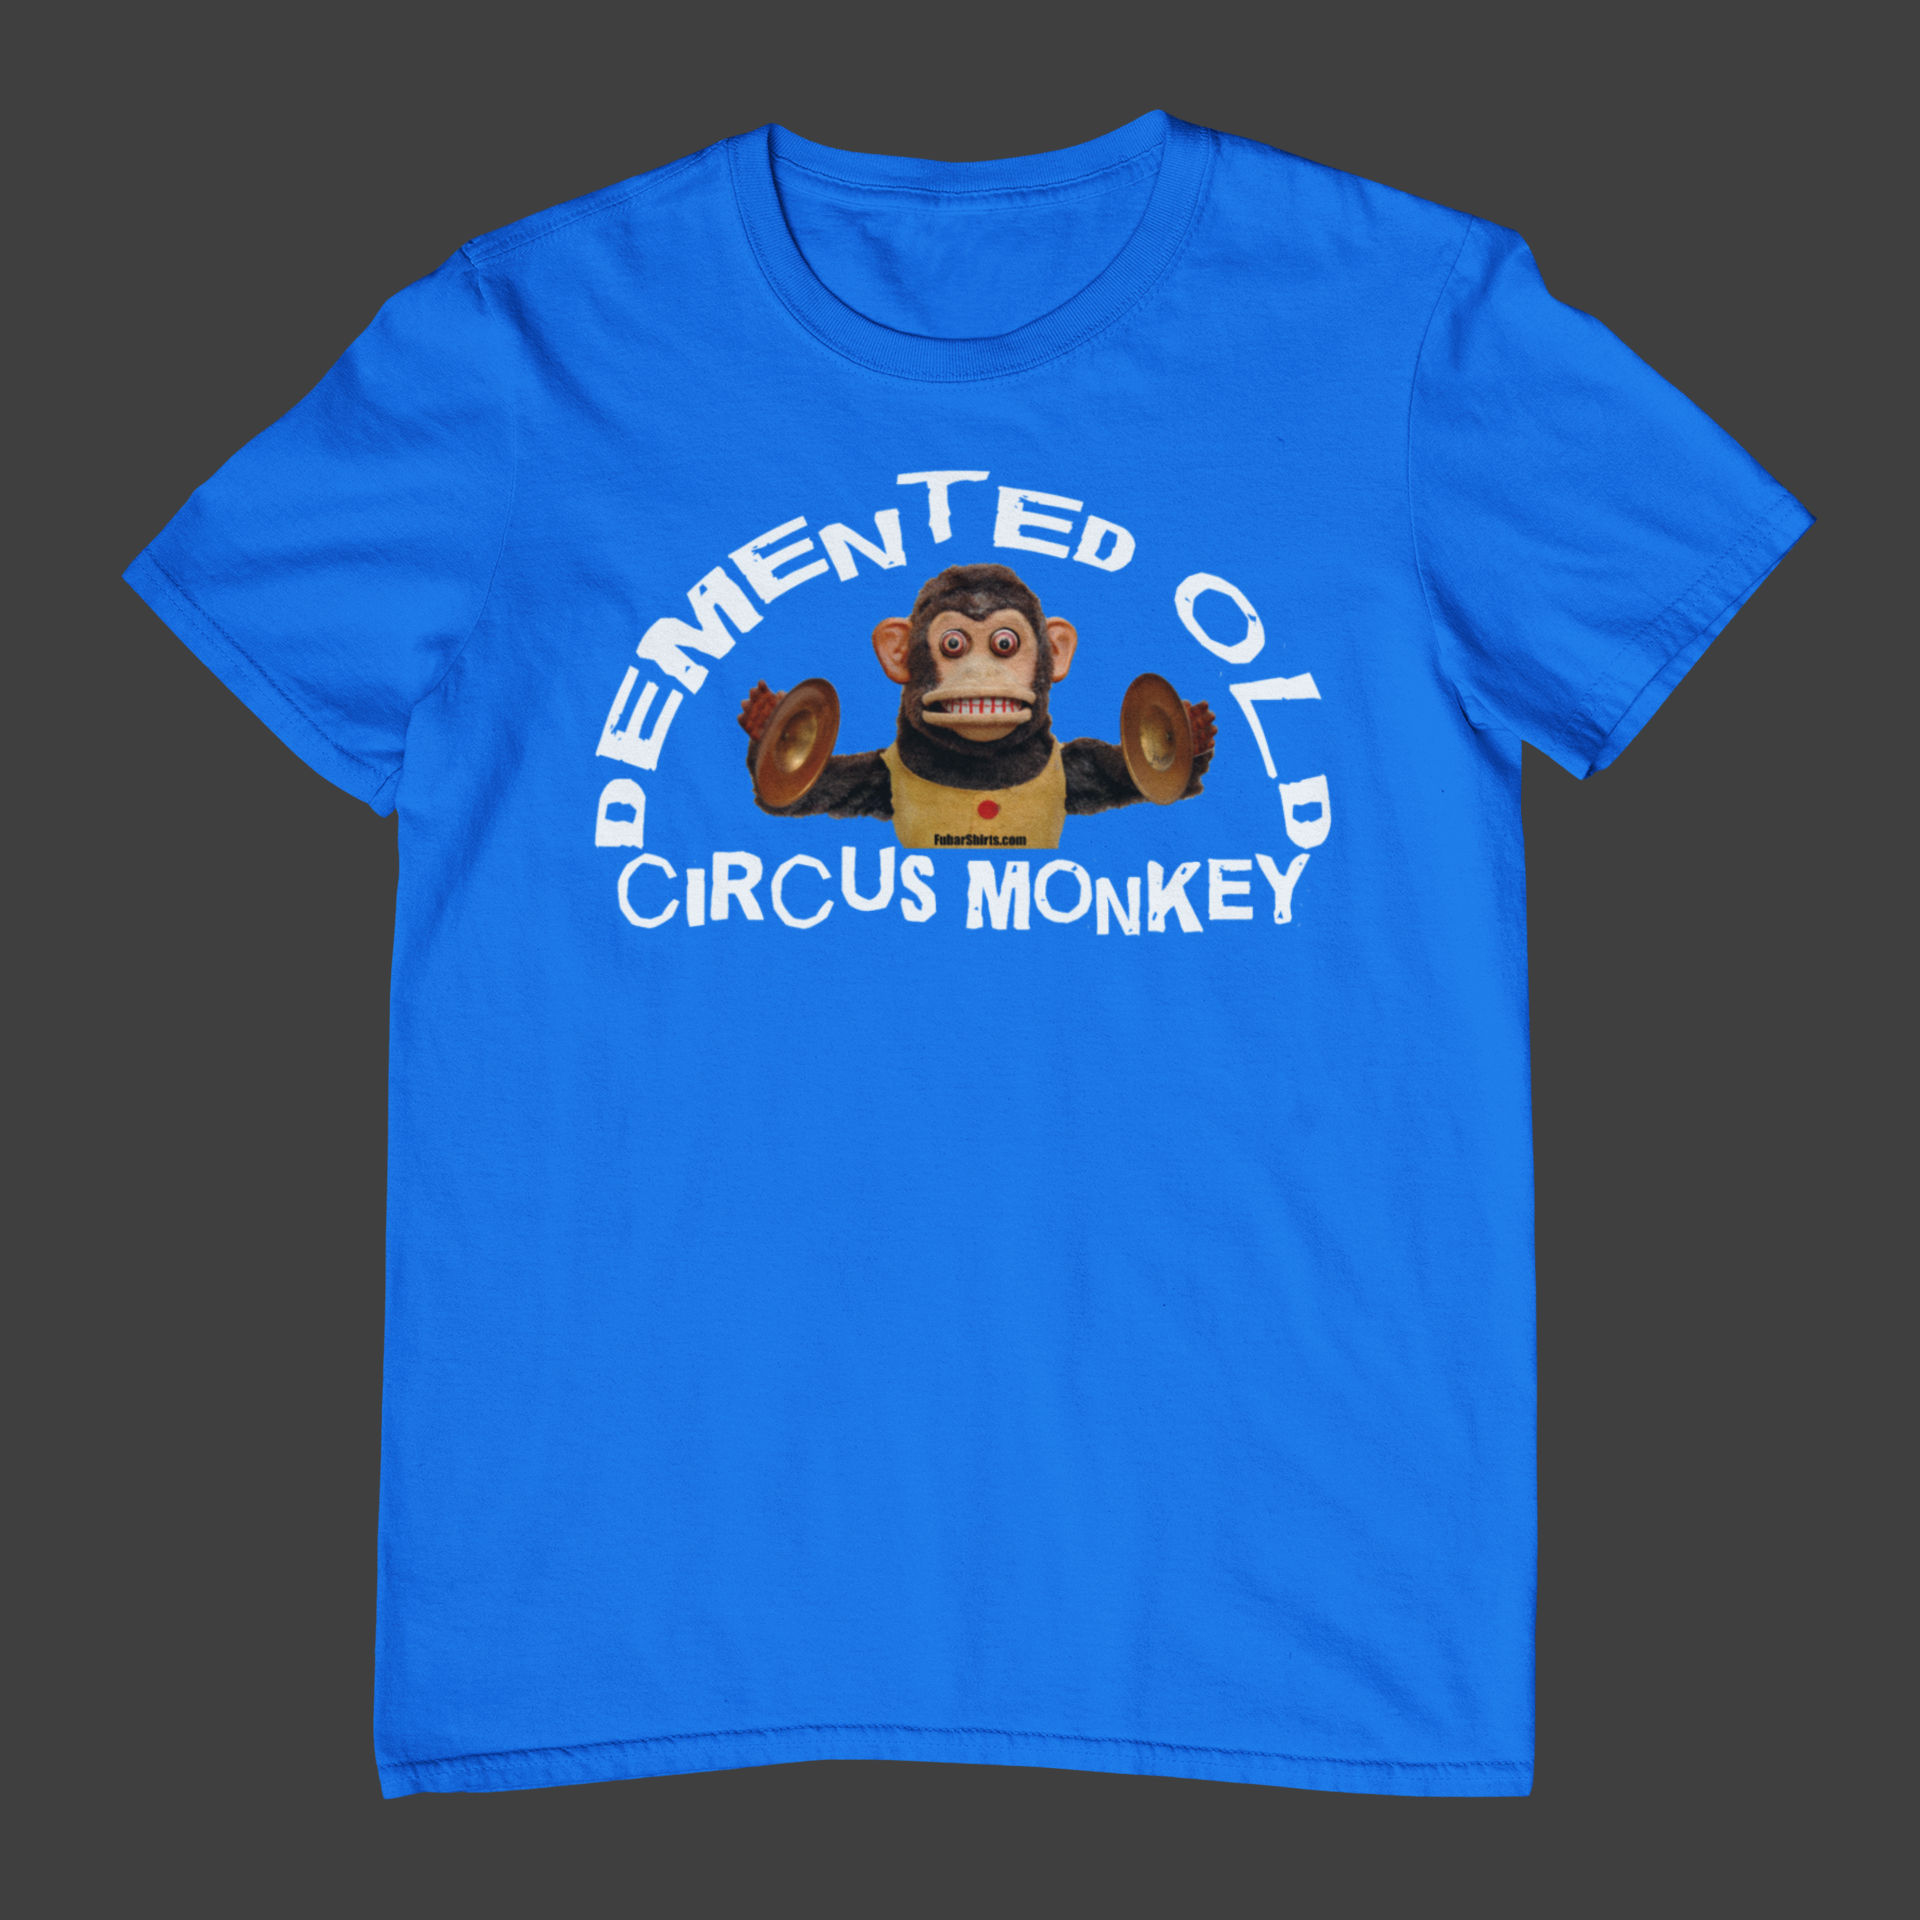 Demented Old Circus Monkey t-shirt. Funny TV Tees. Blue color. $16.99